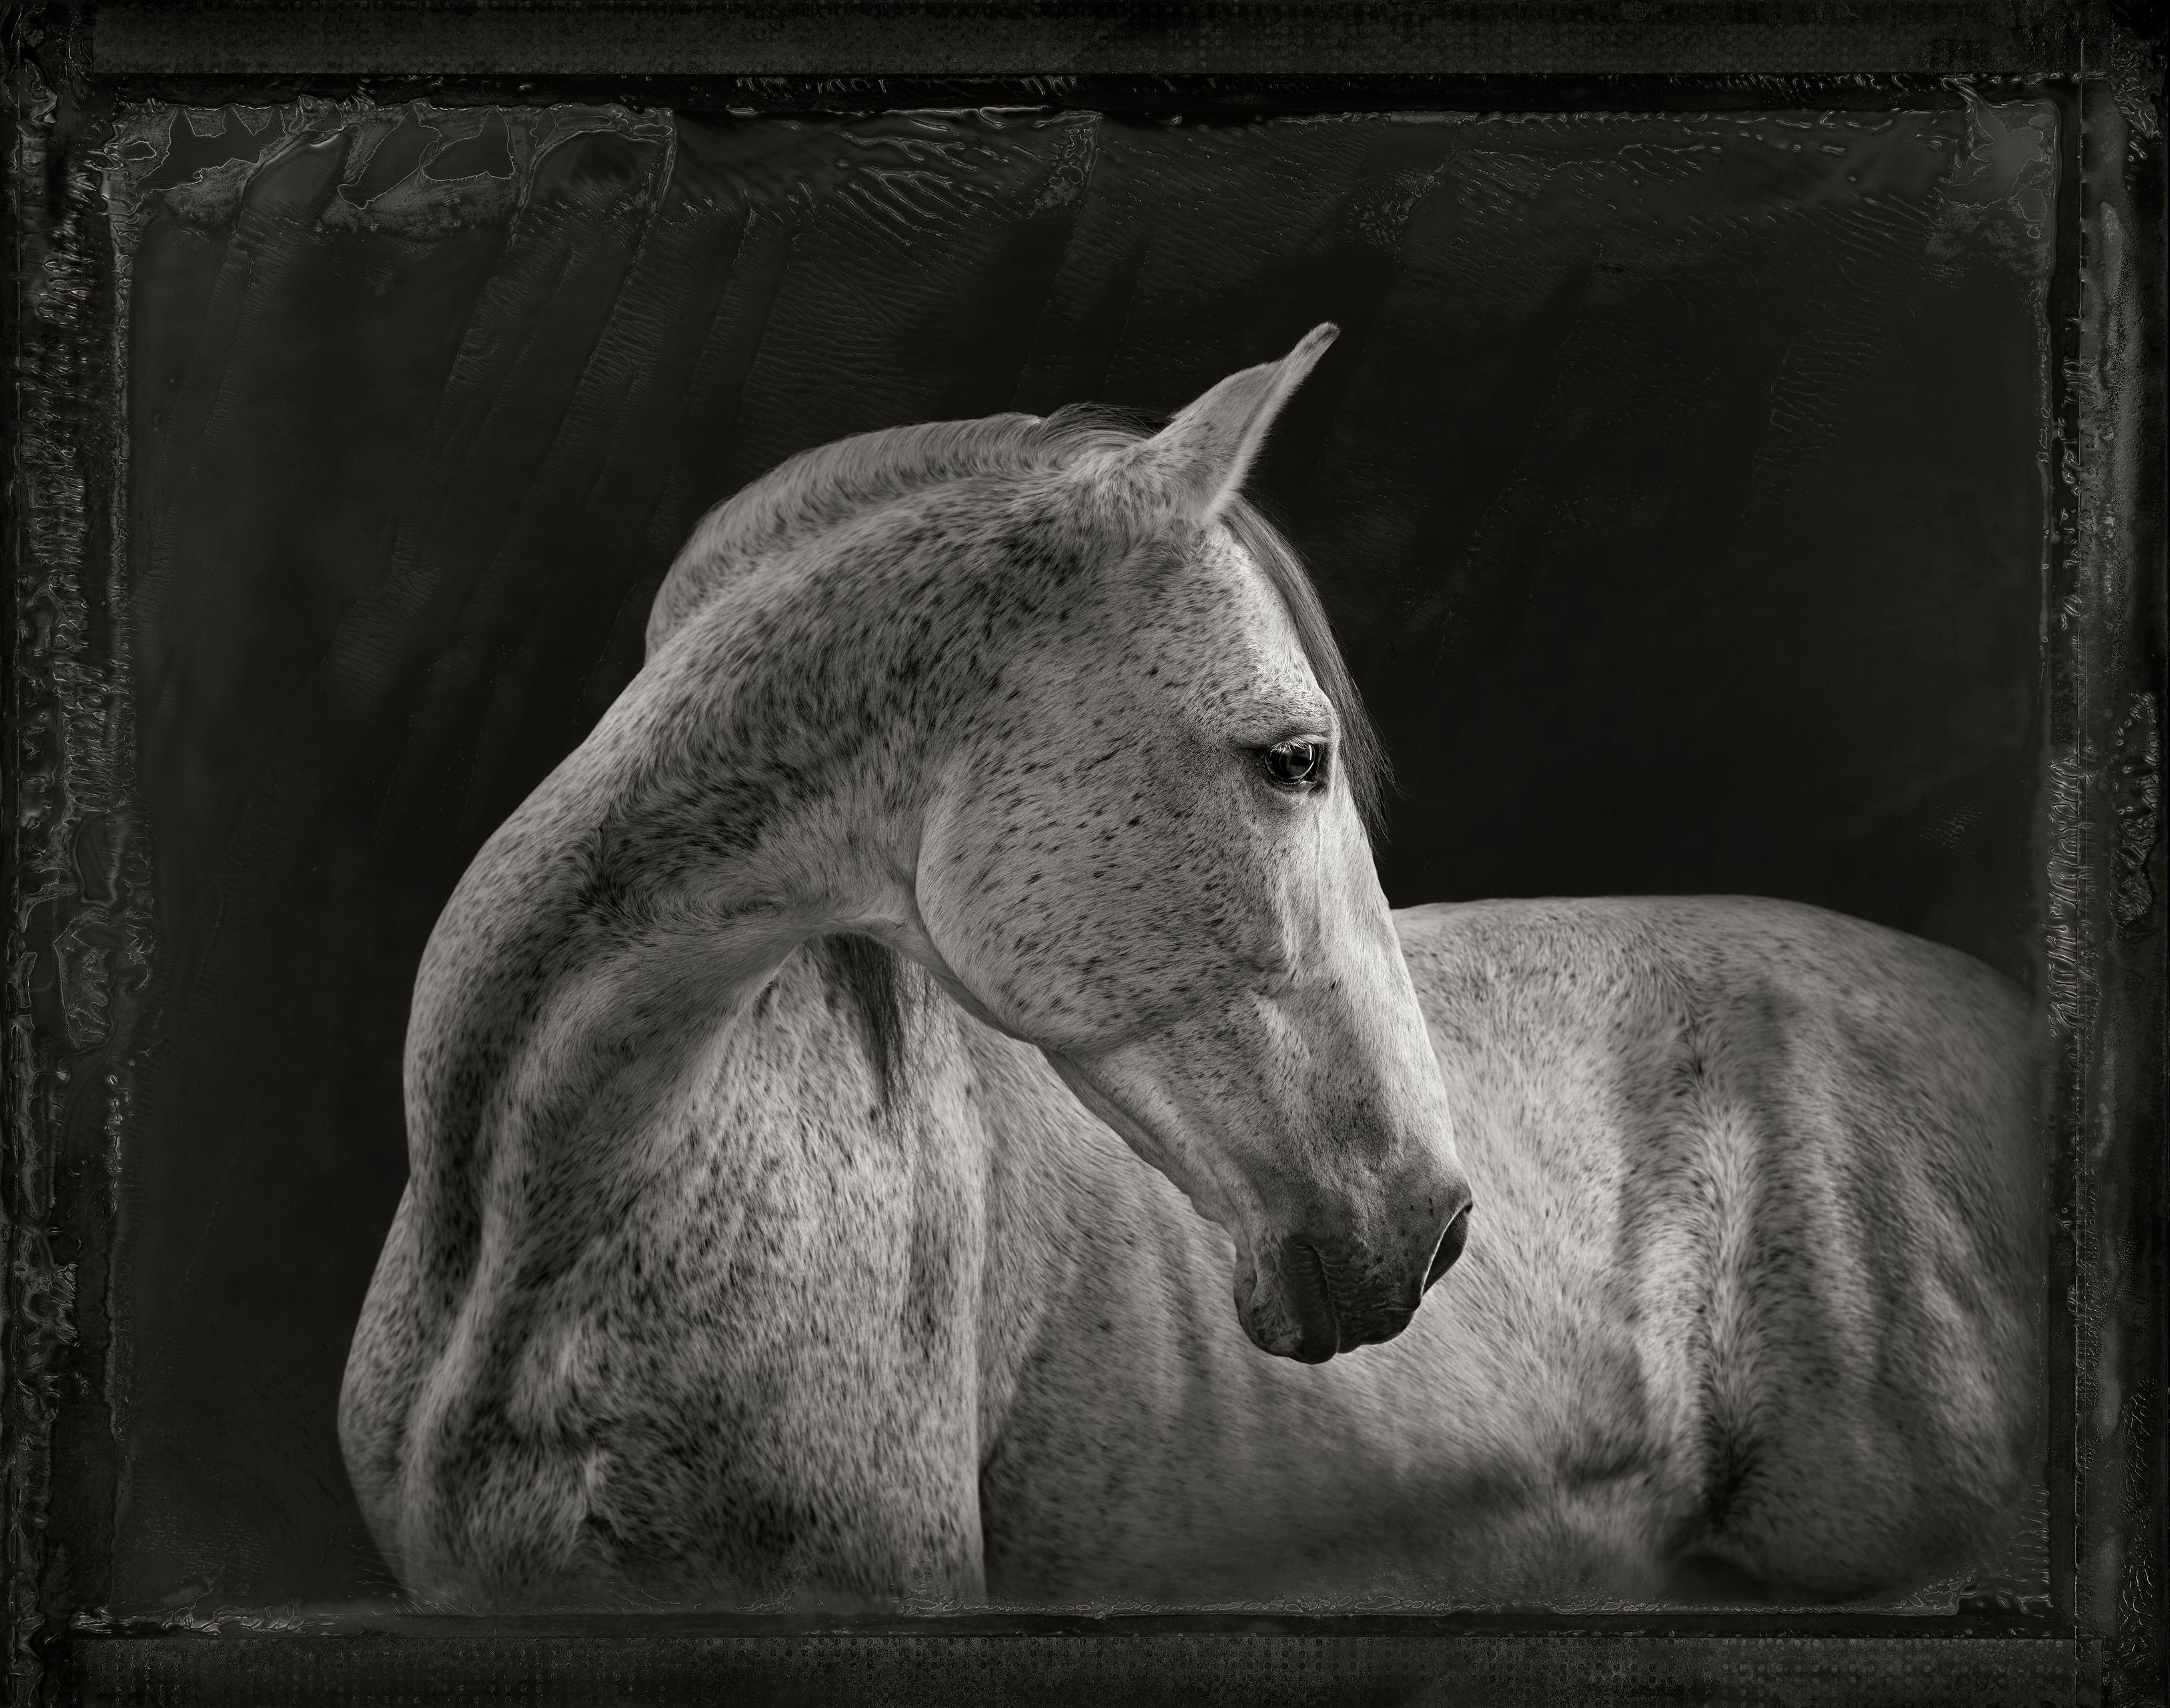 "White Horse" is a signed photograph

For millions of years, early humans evolved alongside all other wildlife in a completely analog world, sharing the same natural environments in very similar ways. Although our paths diverged markedly around